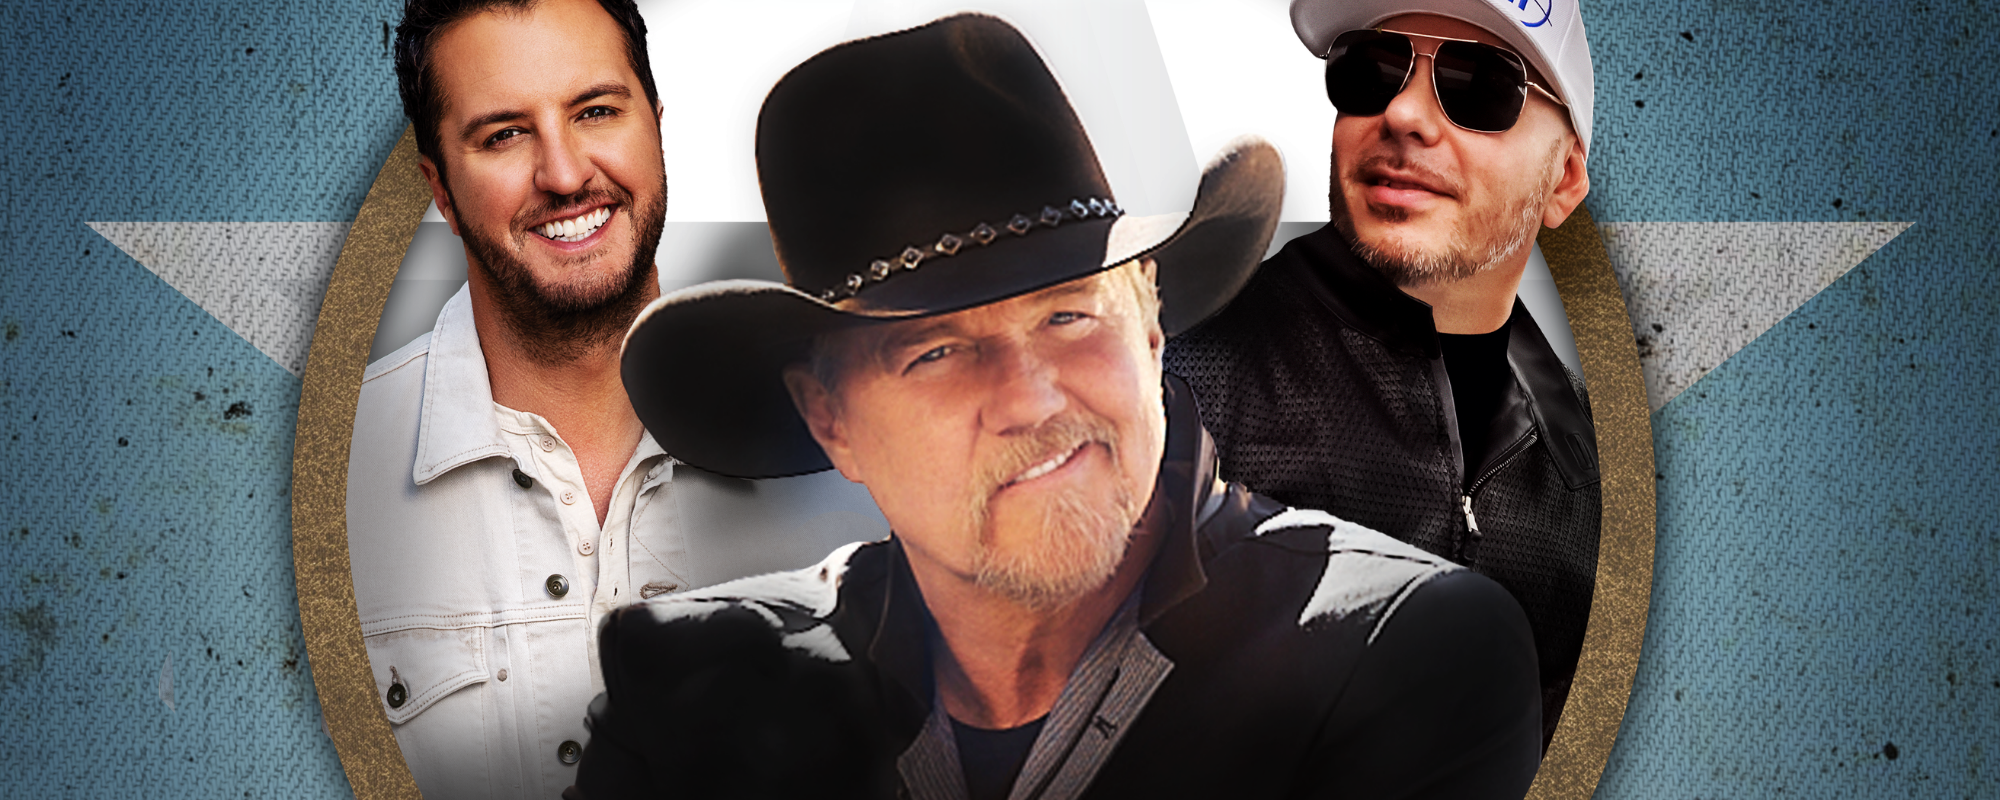 WATCH: Trace Adkins, Luke Bryan & Pitbull Join Forces For “Where The Country Girls At” Video